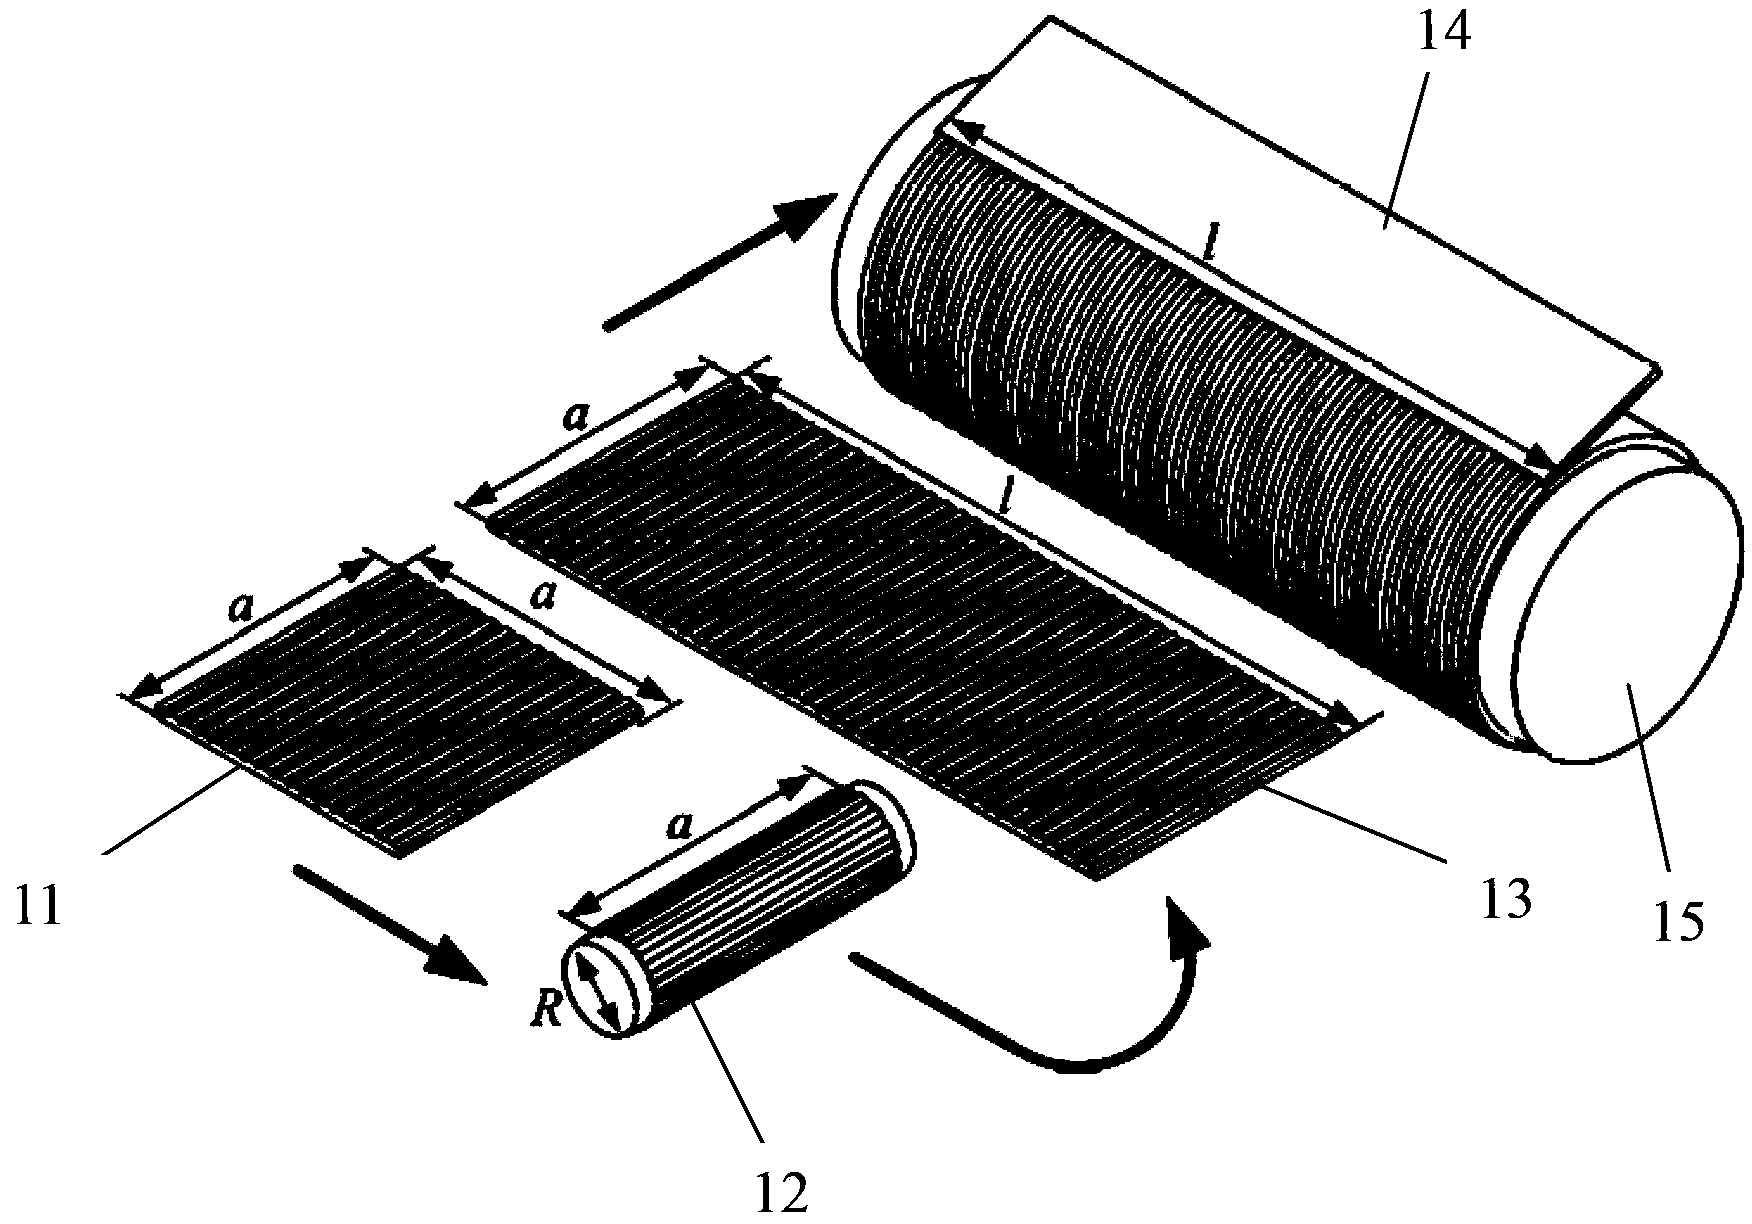 Method for manufacturing rotary drum pressing die based on dynamic nano engraving technology